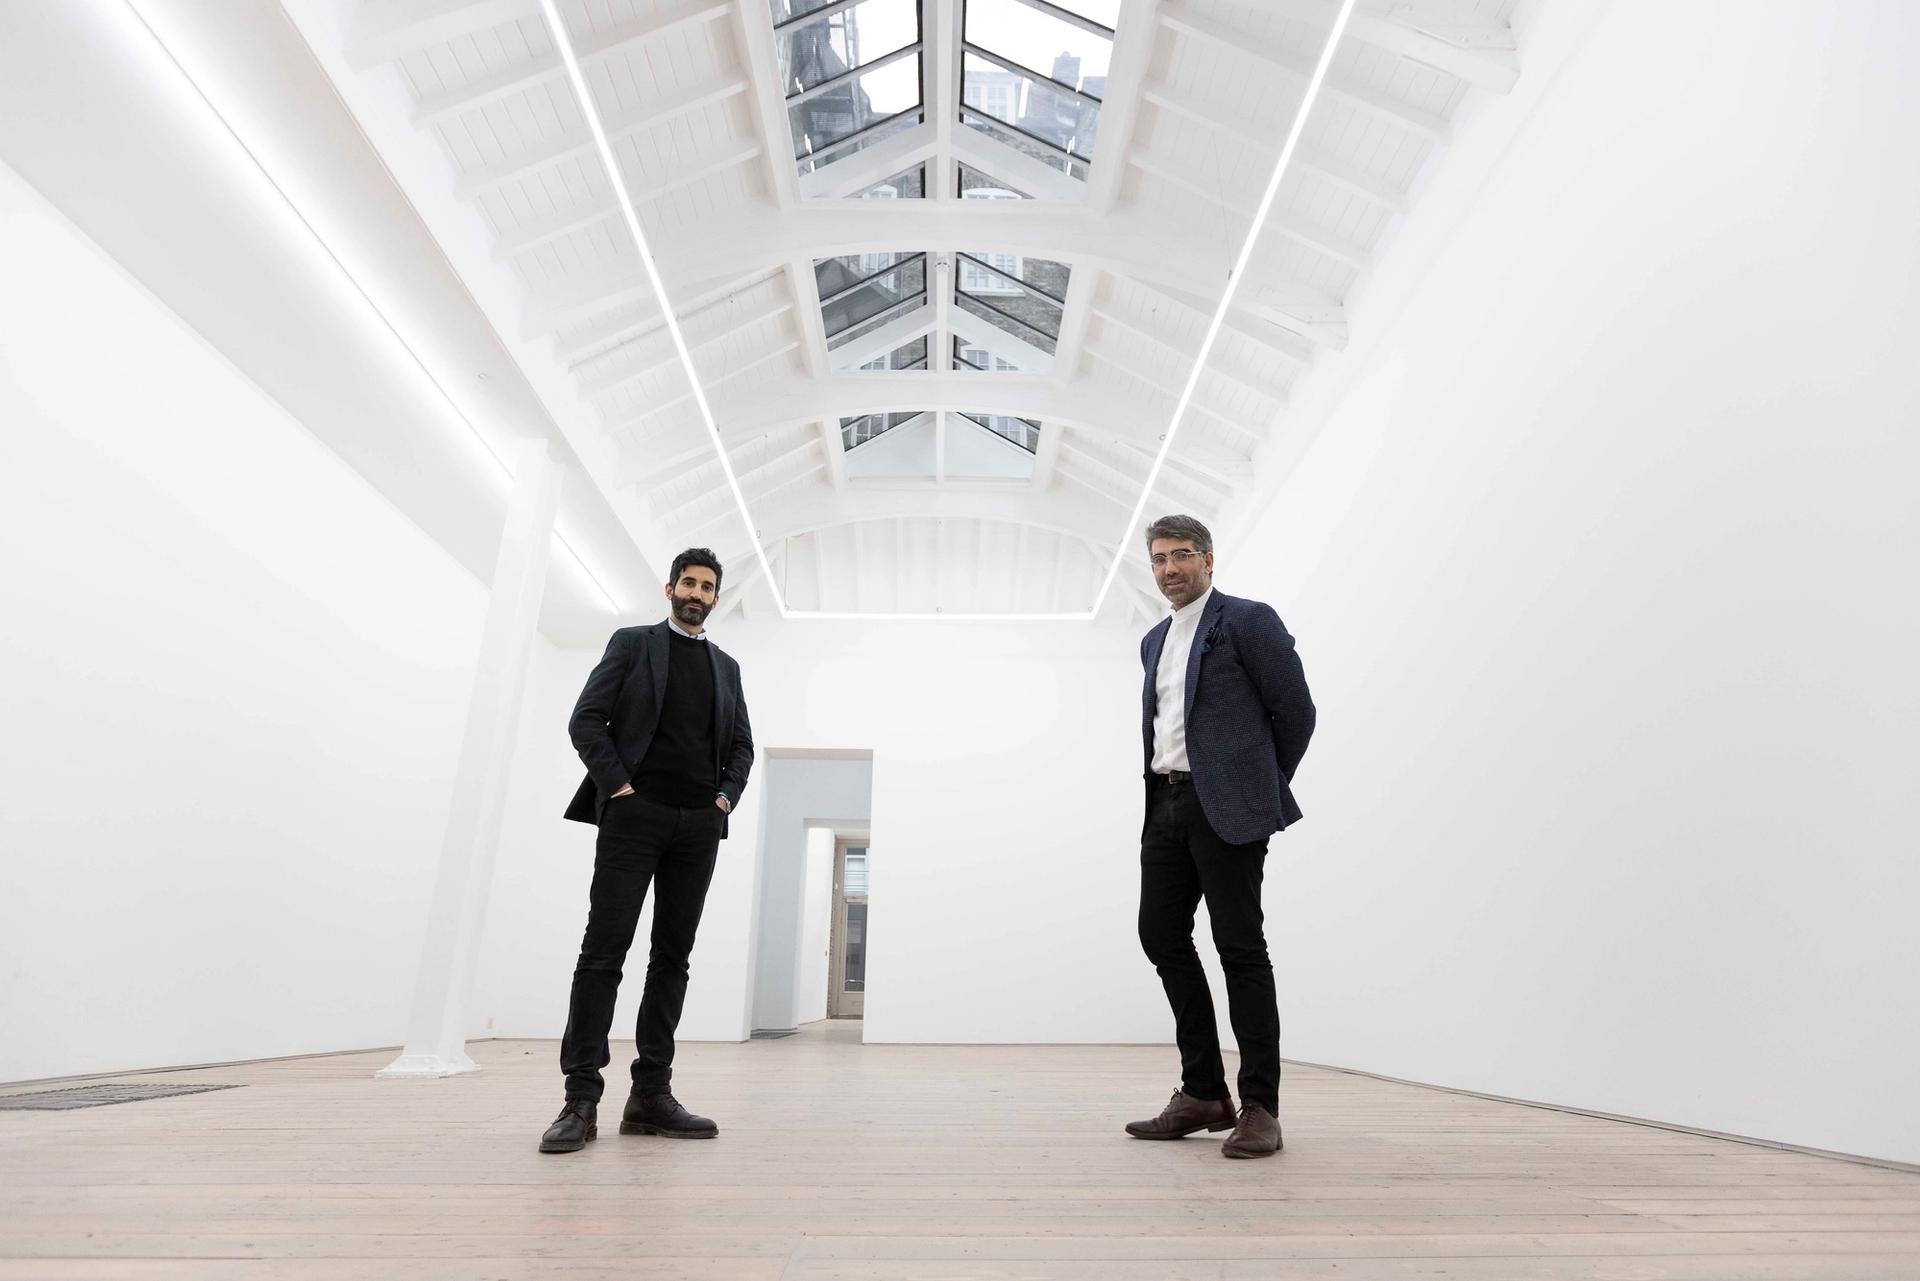 Jeremy Epstein and Charlie Fellowes in the new Edel Assanti gallery

Photo: Will Amlot. Courtesy Edel Assanti



